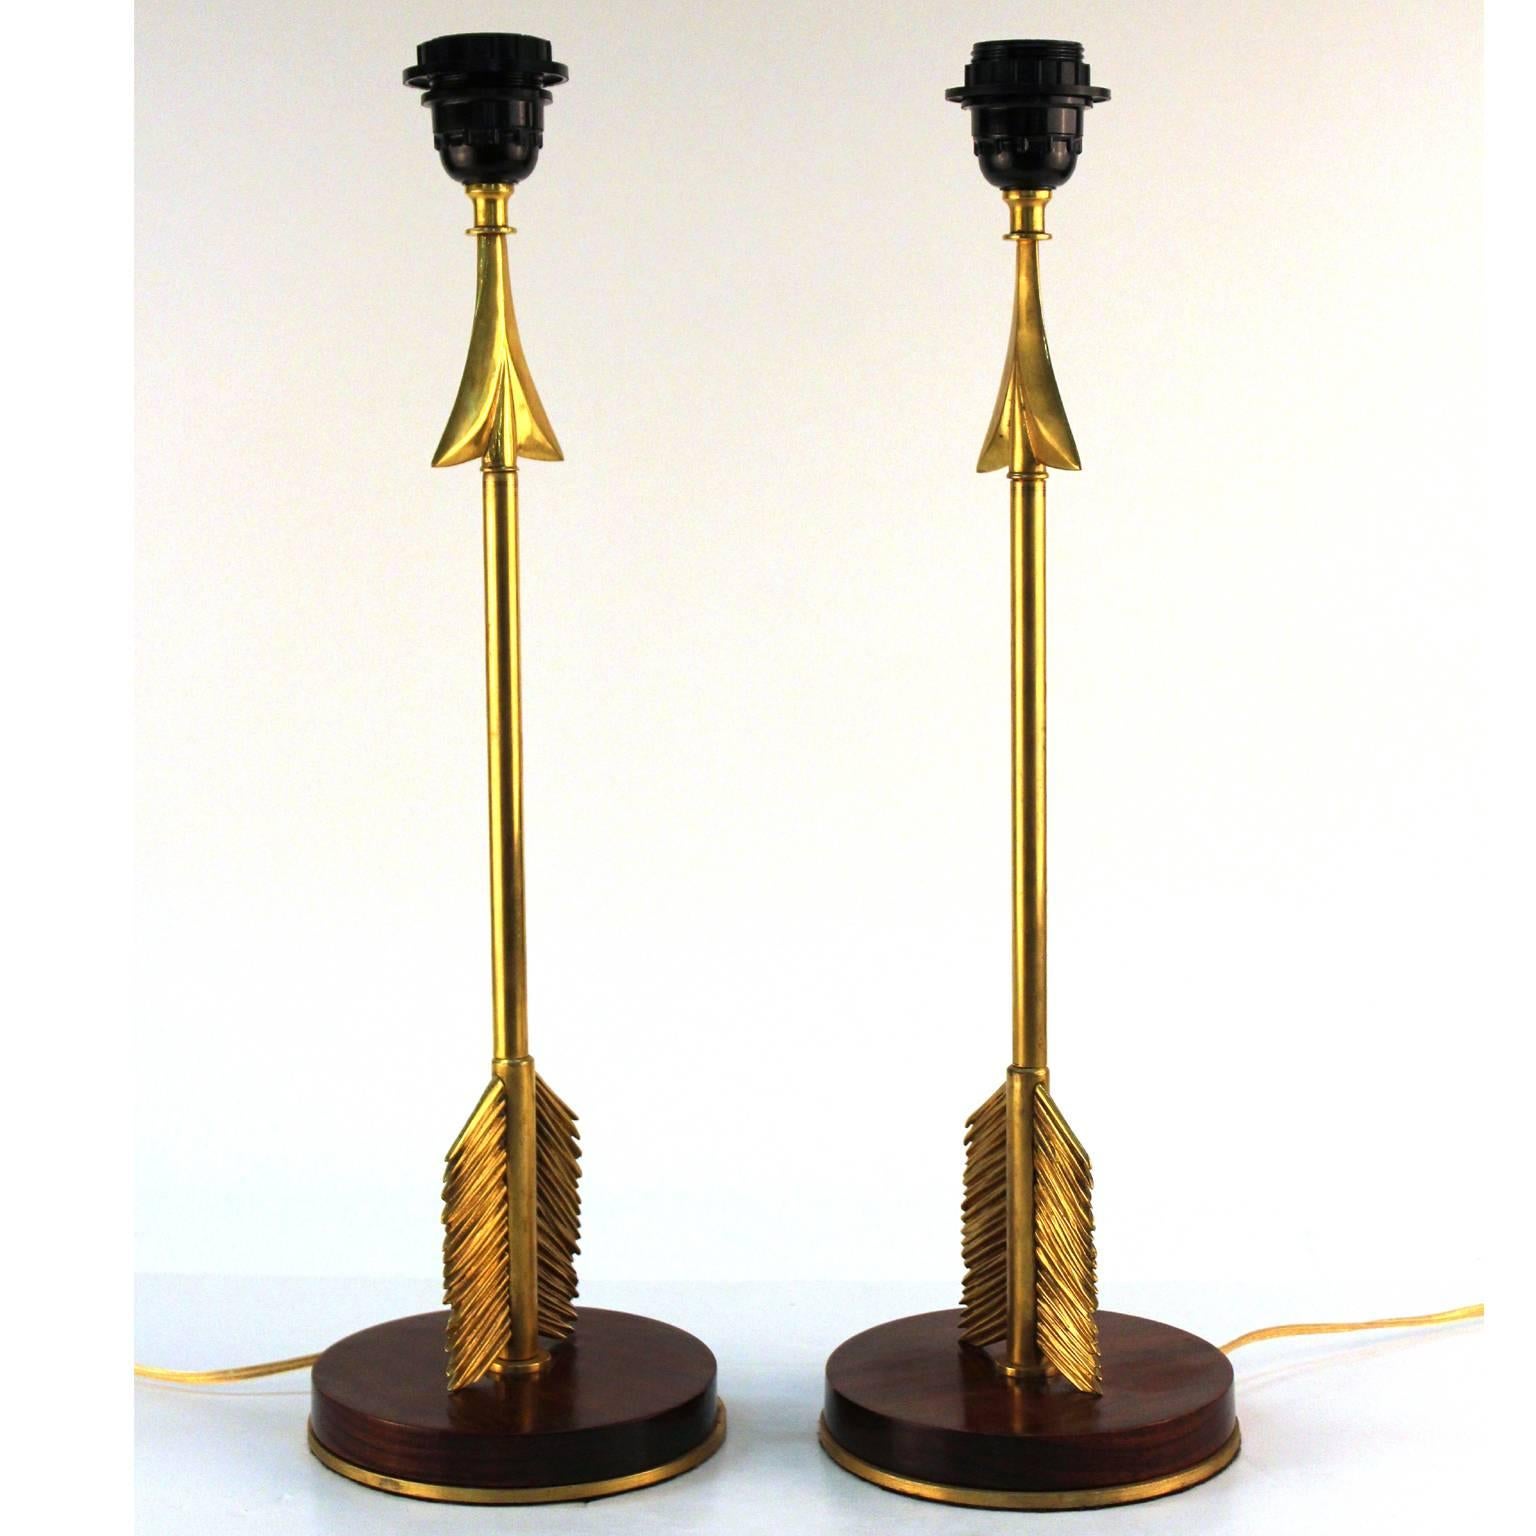 A pair of 1940s French Maison Jansen style arrow table lamps made of gilded bronze on a mahogany wood base. Good condition with minor scratches.